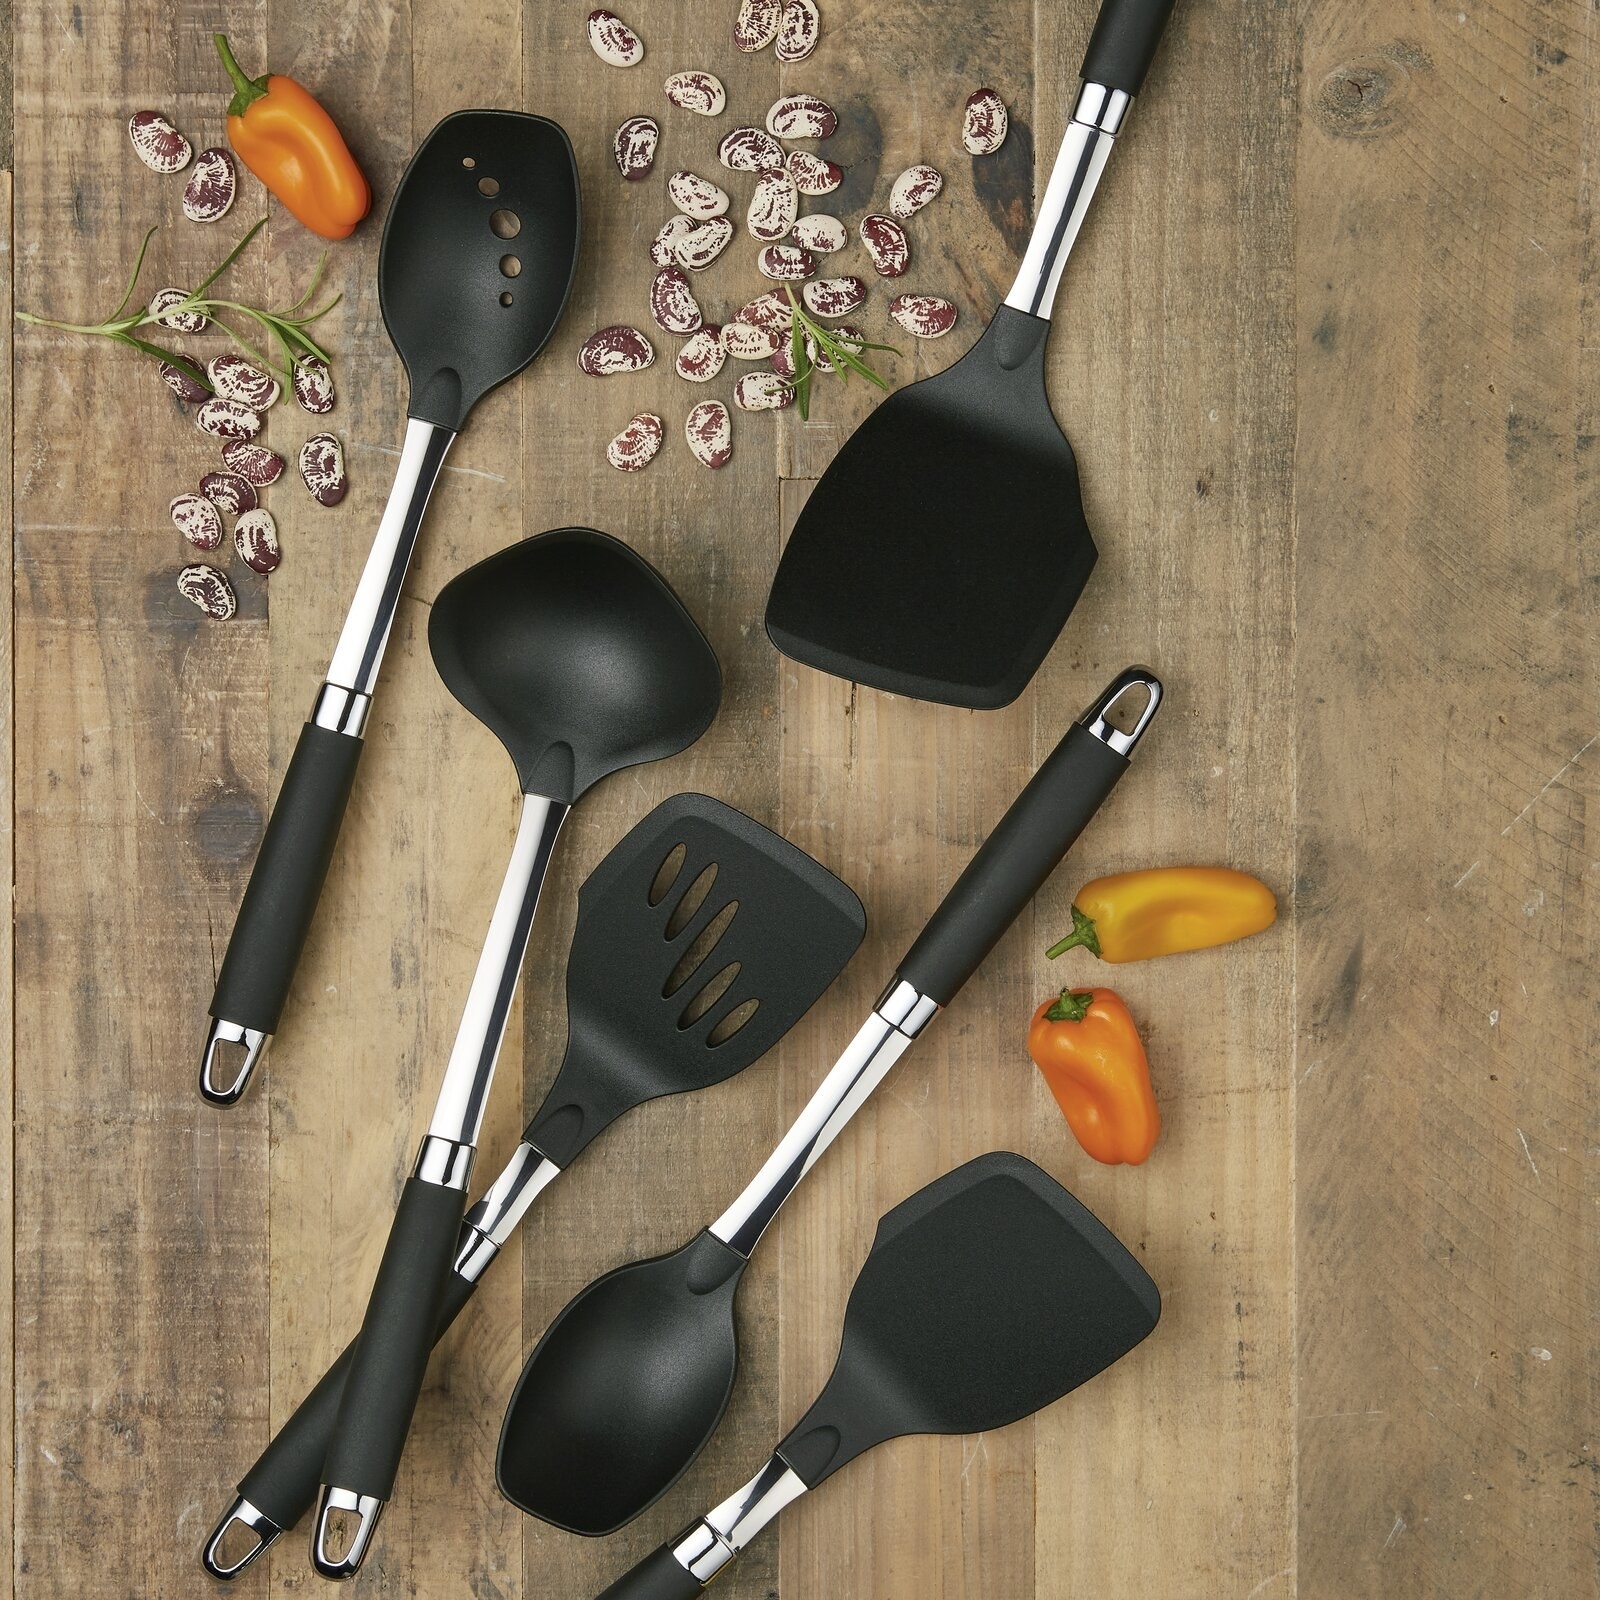 The utensil set styled on a cutting board